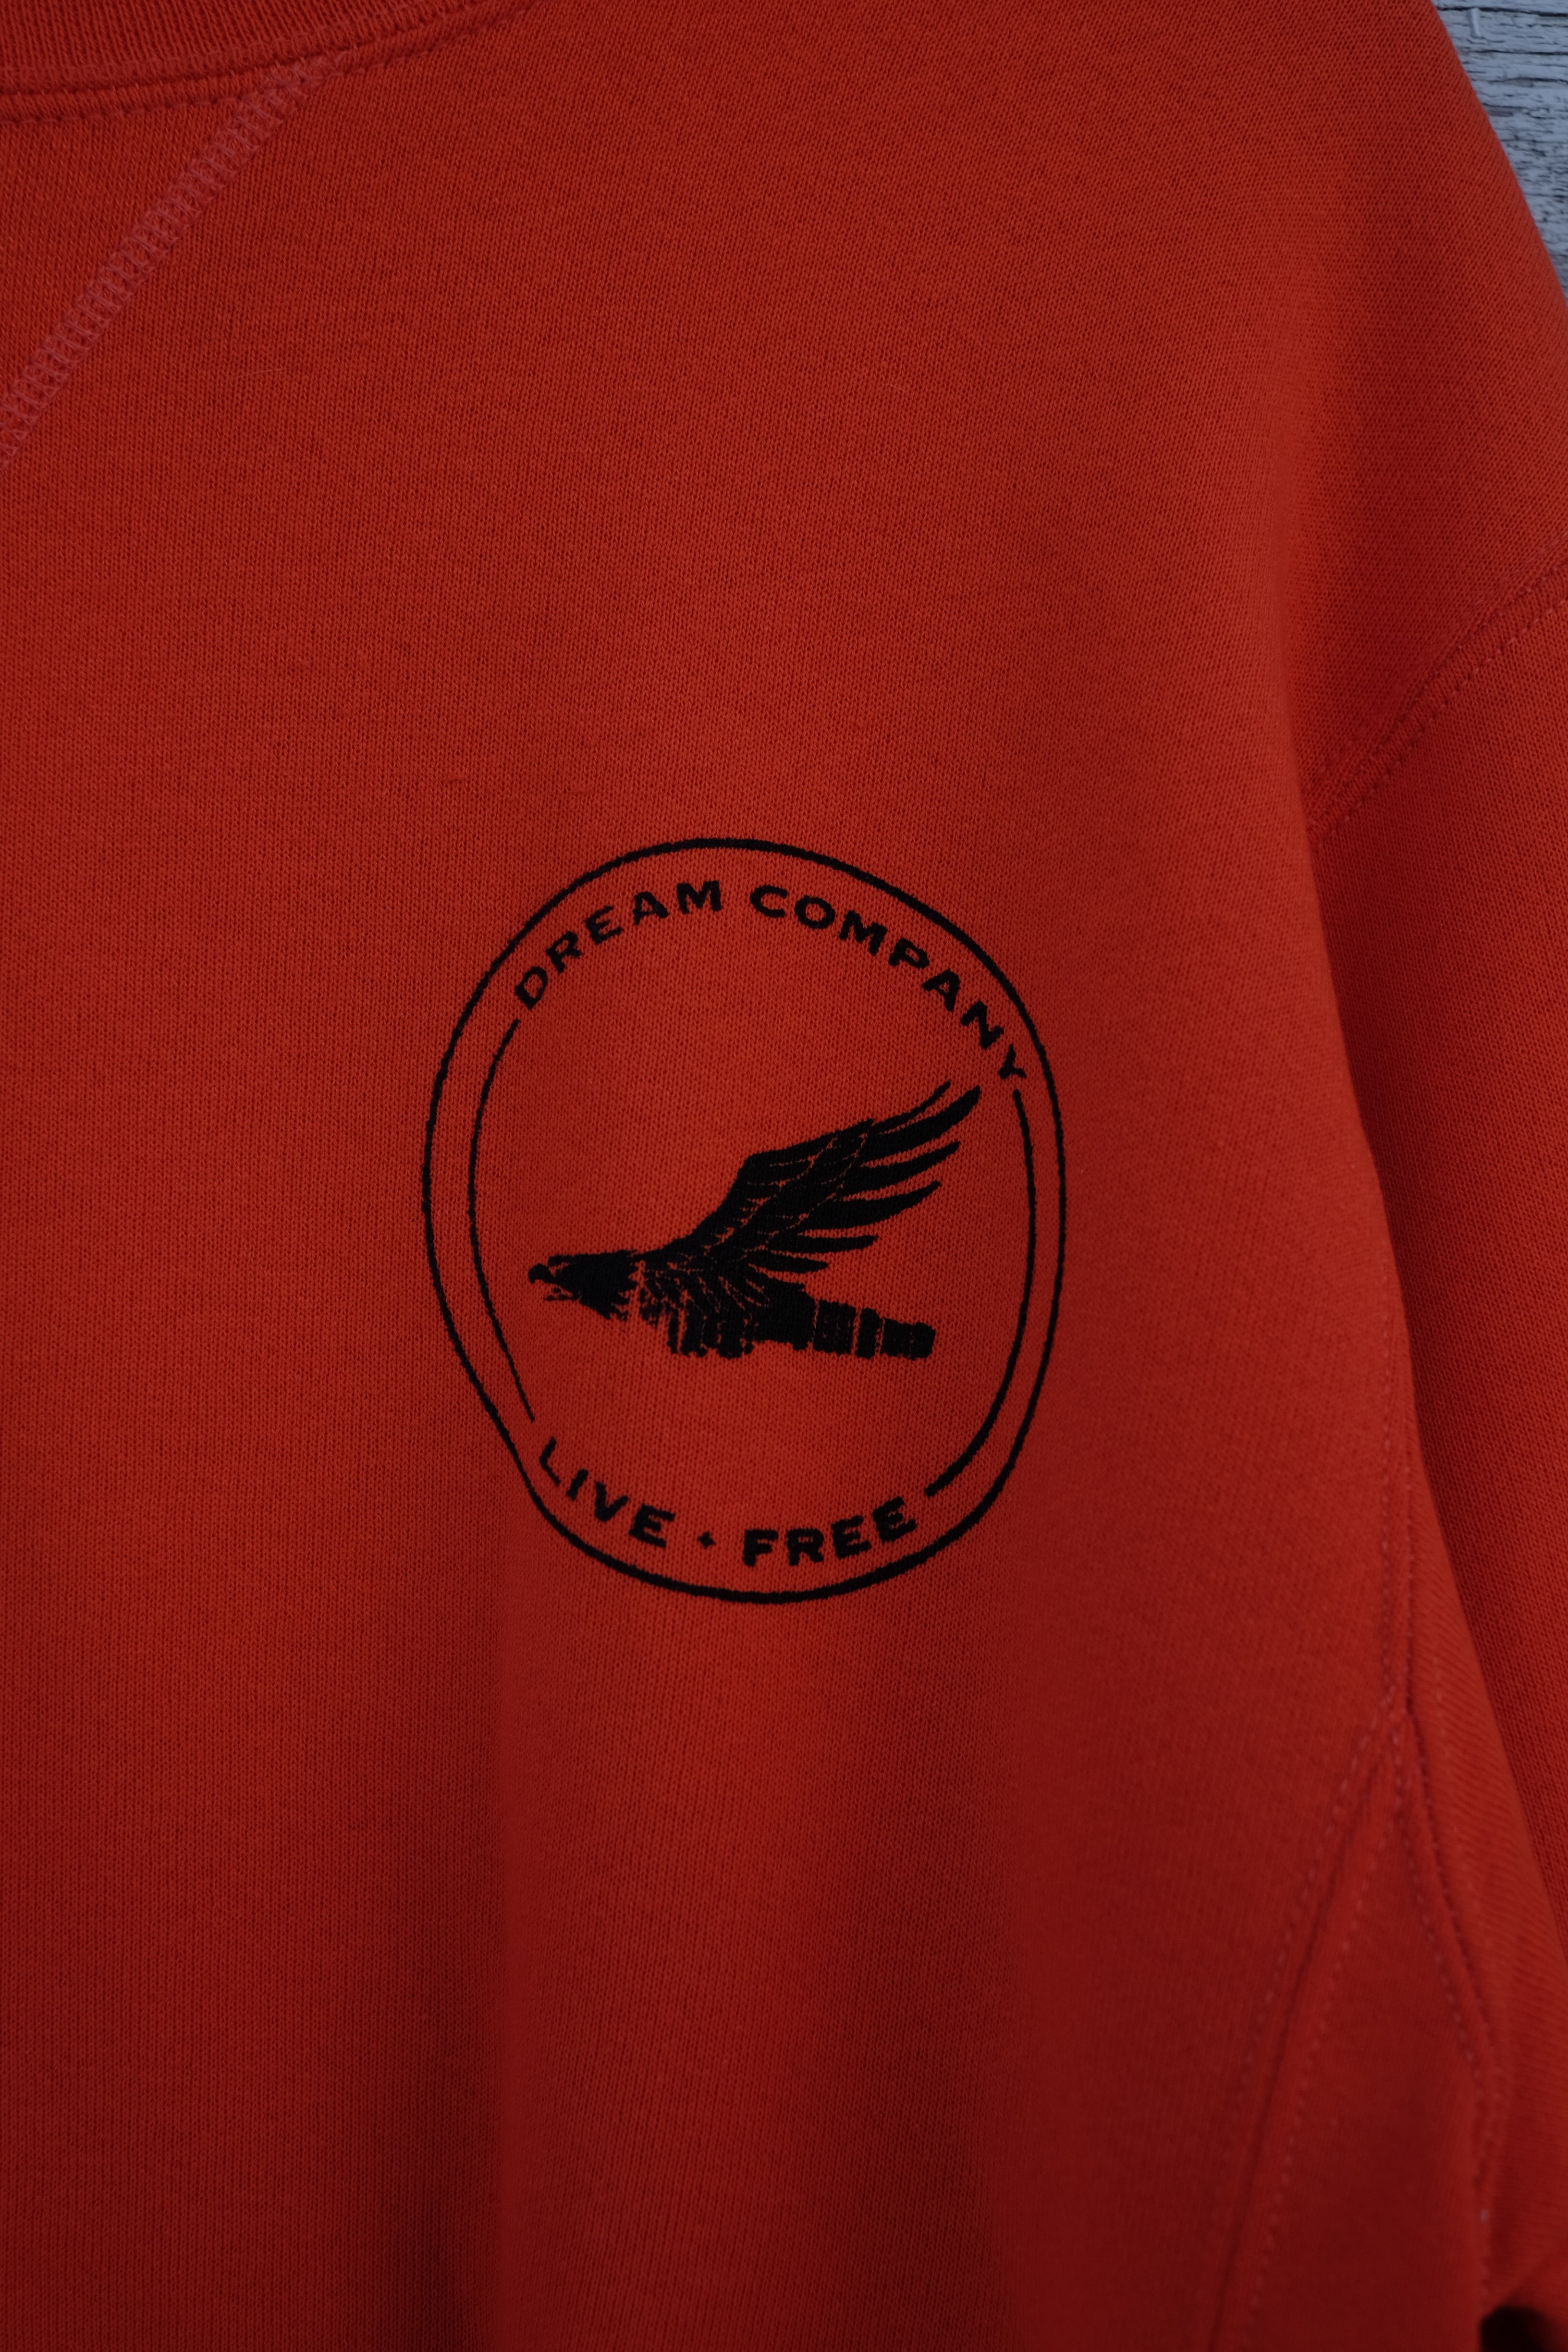 Dream Co. "Live Free" Pull Over